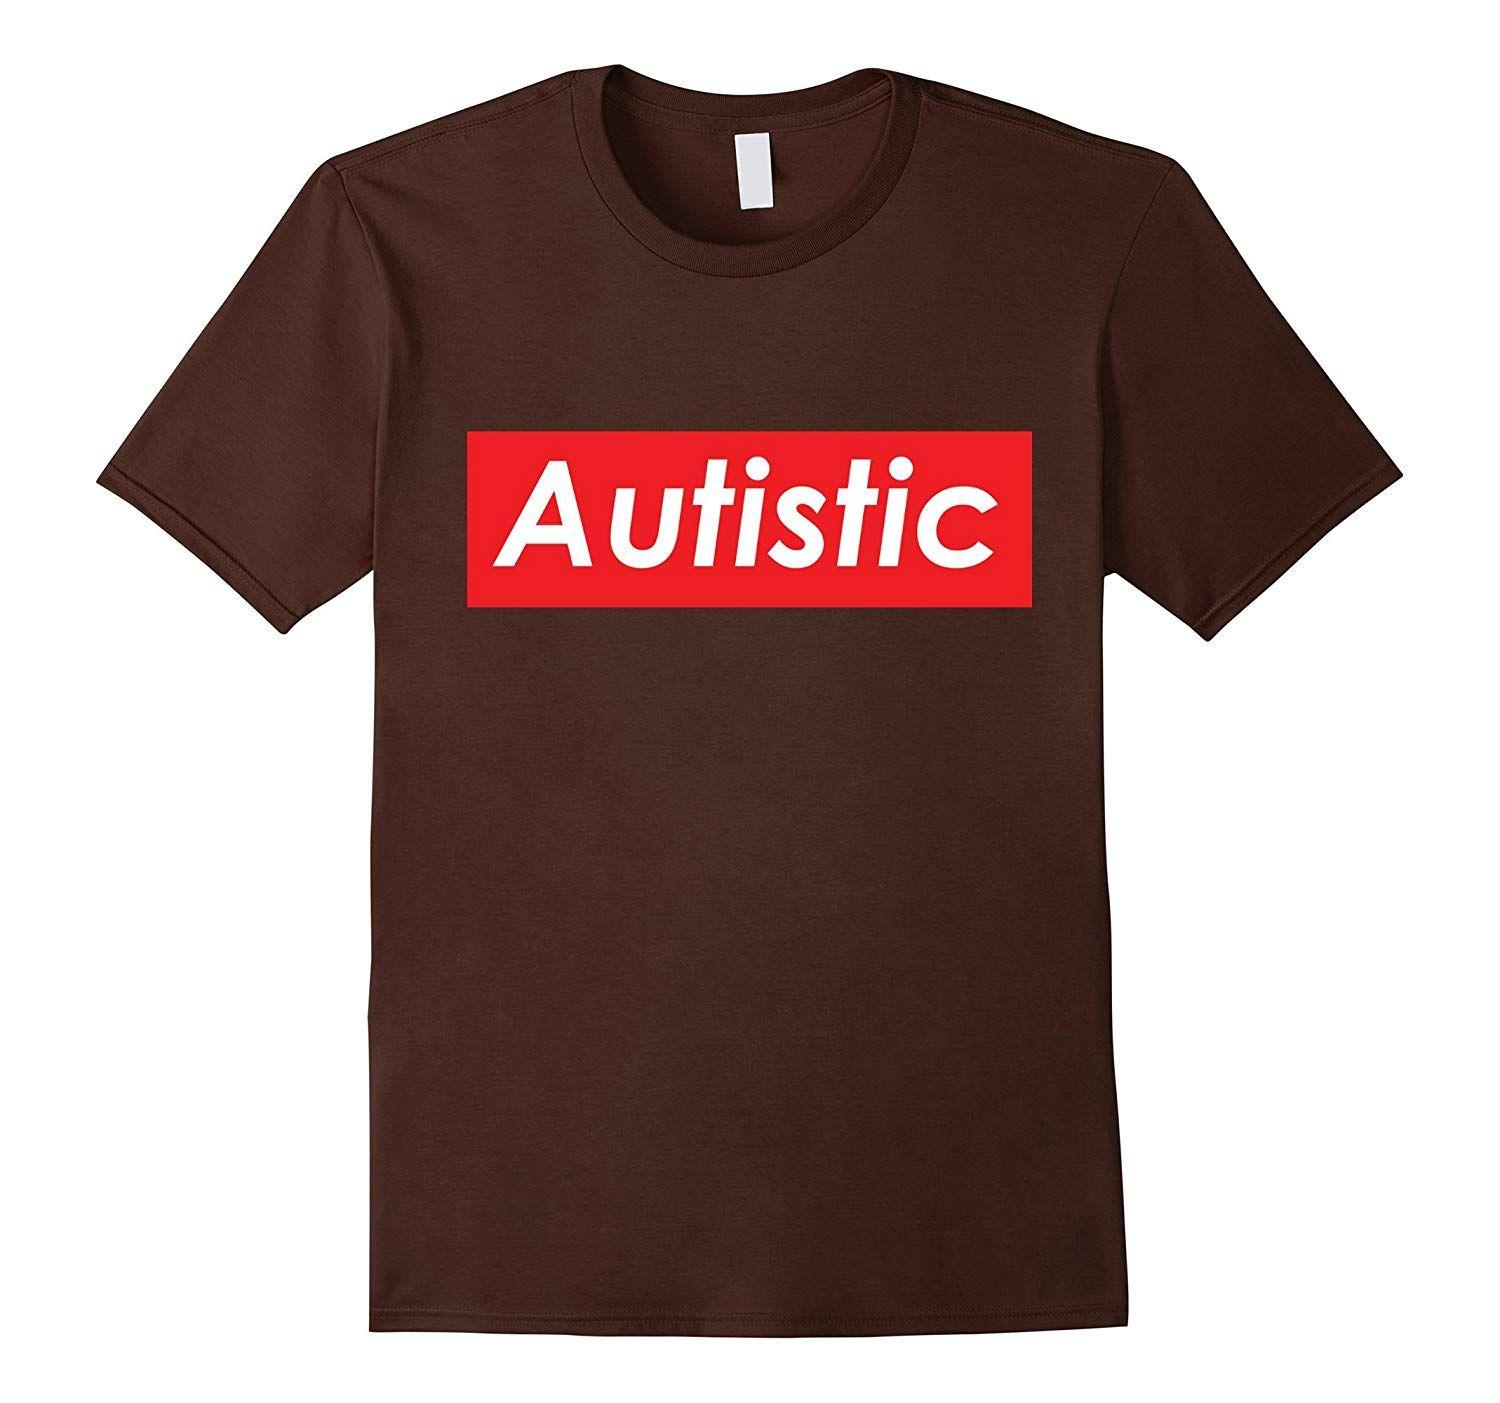 White and Red Box Logo - Autistic Red Box Logo White Letters'm Autistic Shirt